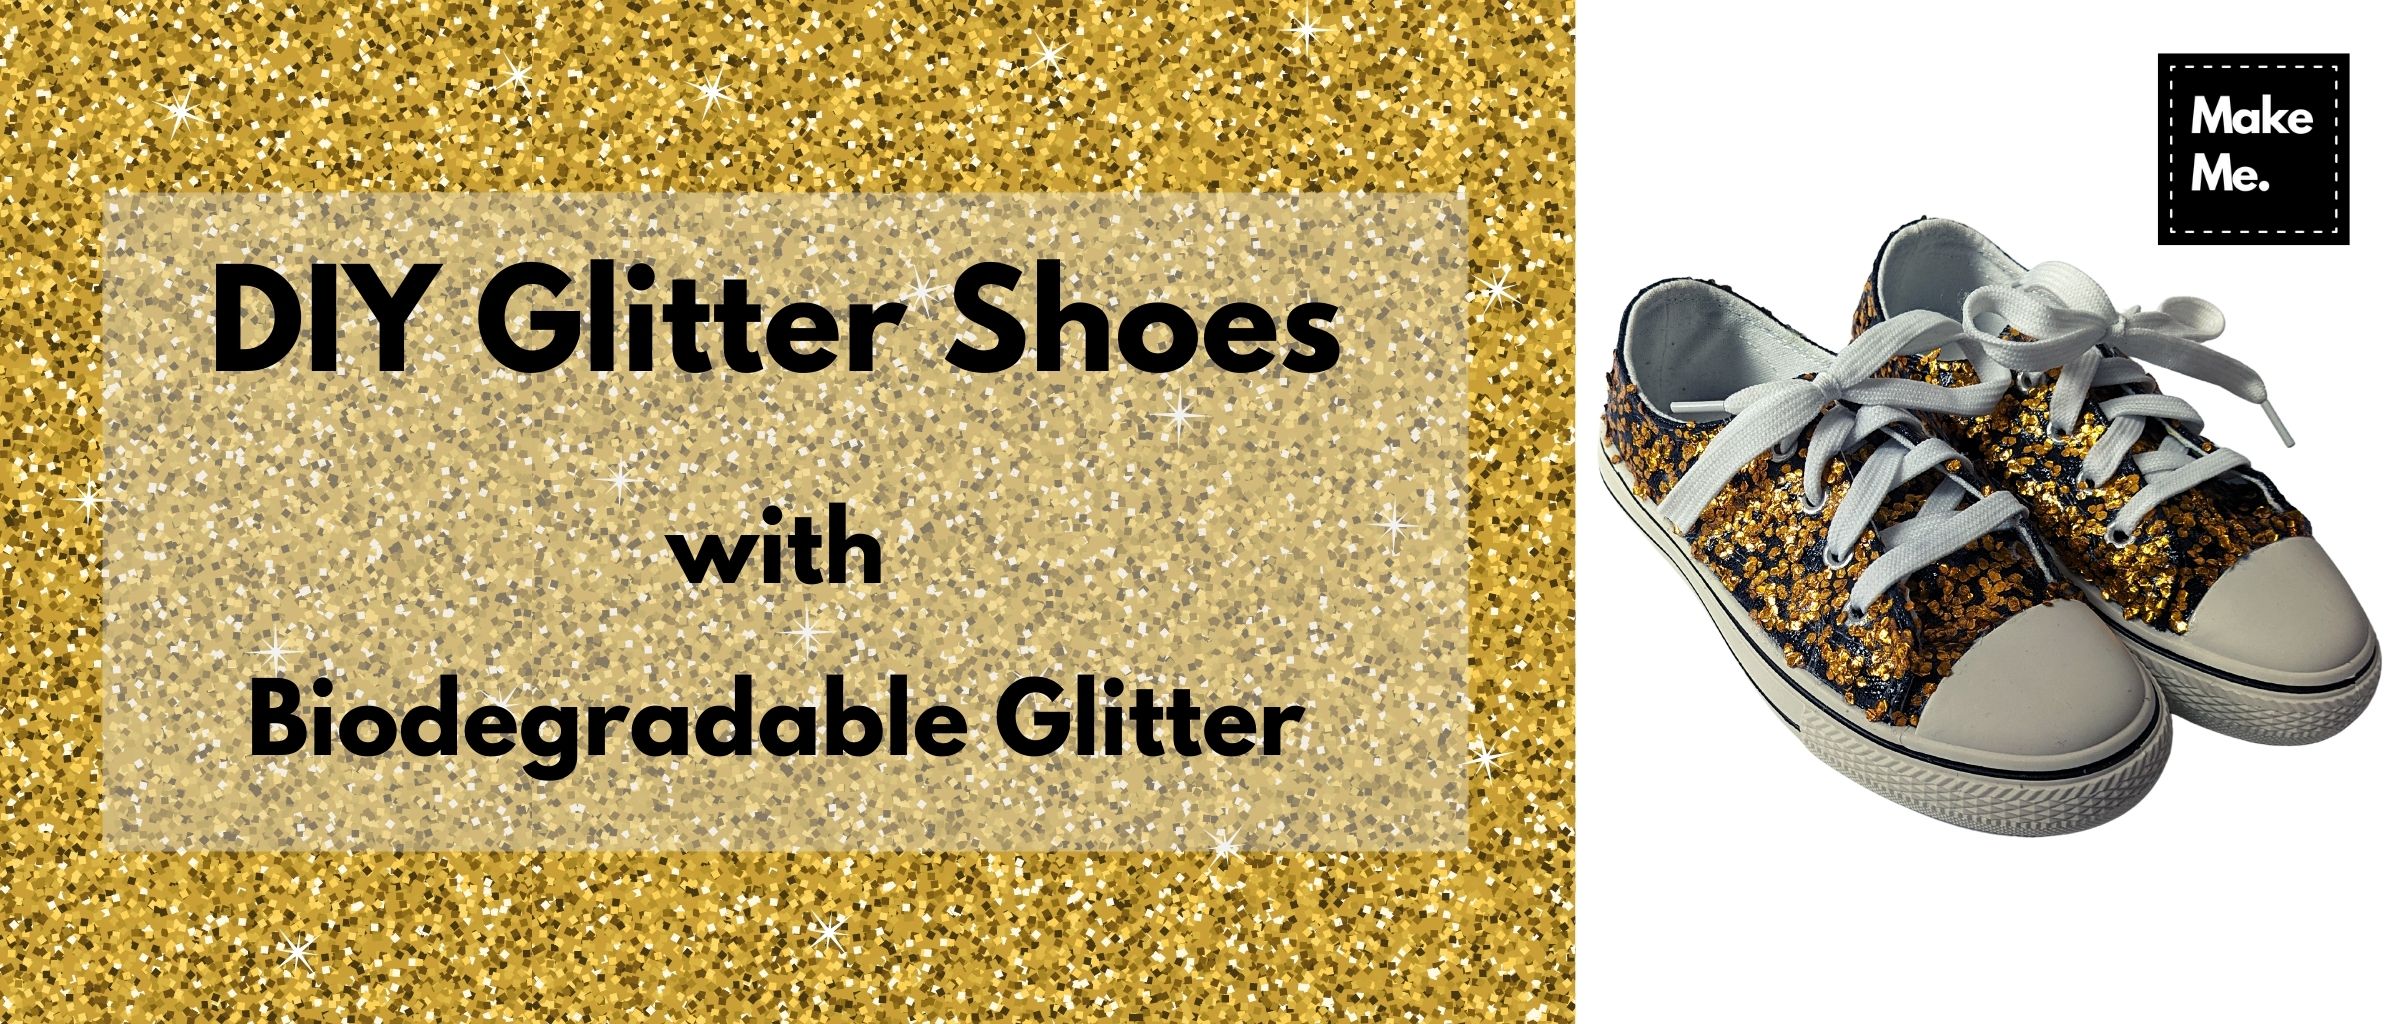 teleskop buffet Rationel Easy DIY Glitter Shoes with Biodegradable Glitter – Make Me | Shoe-Making  Kits and Workshops